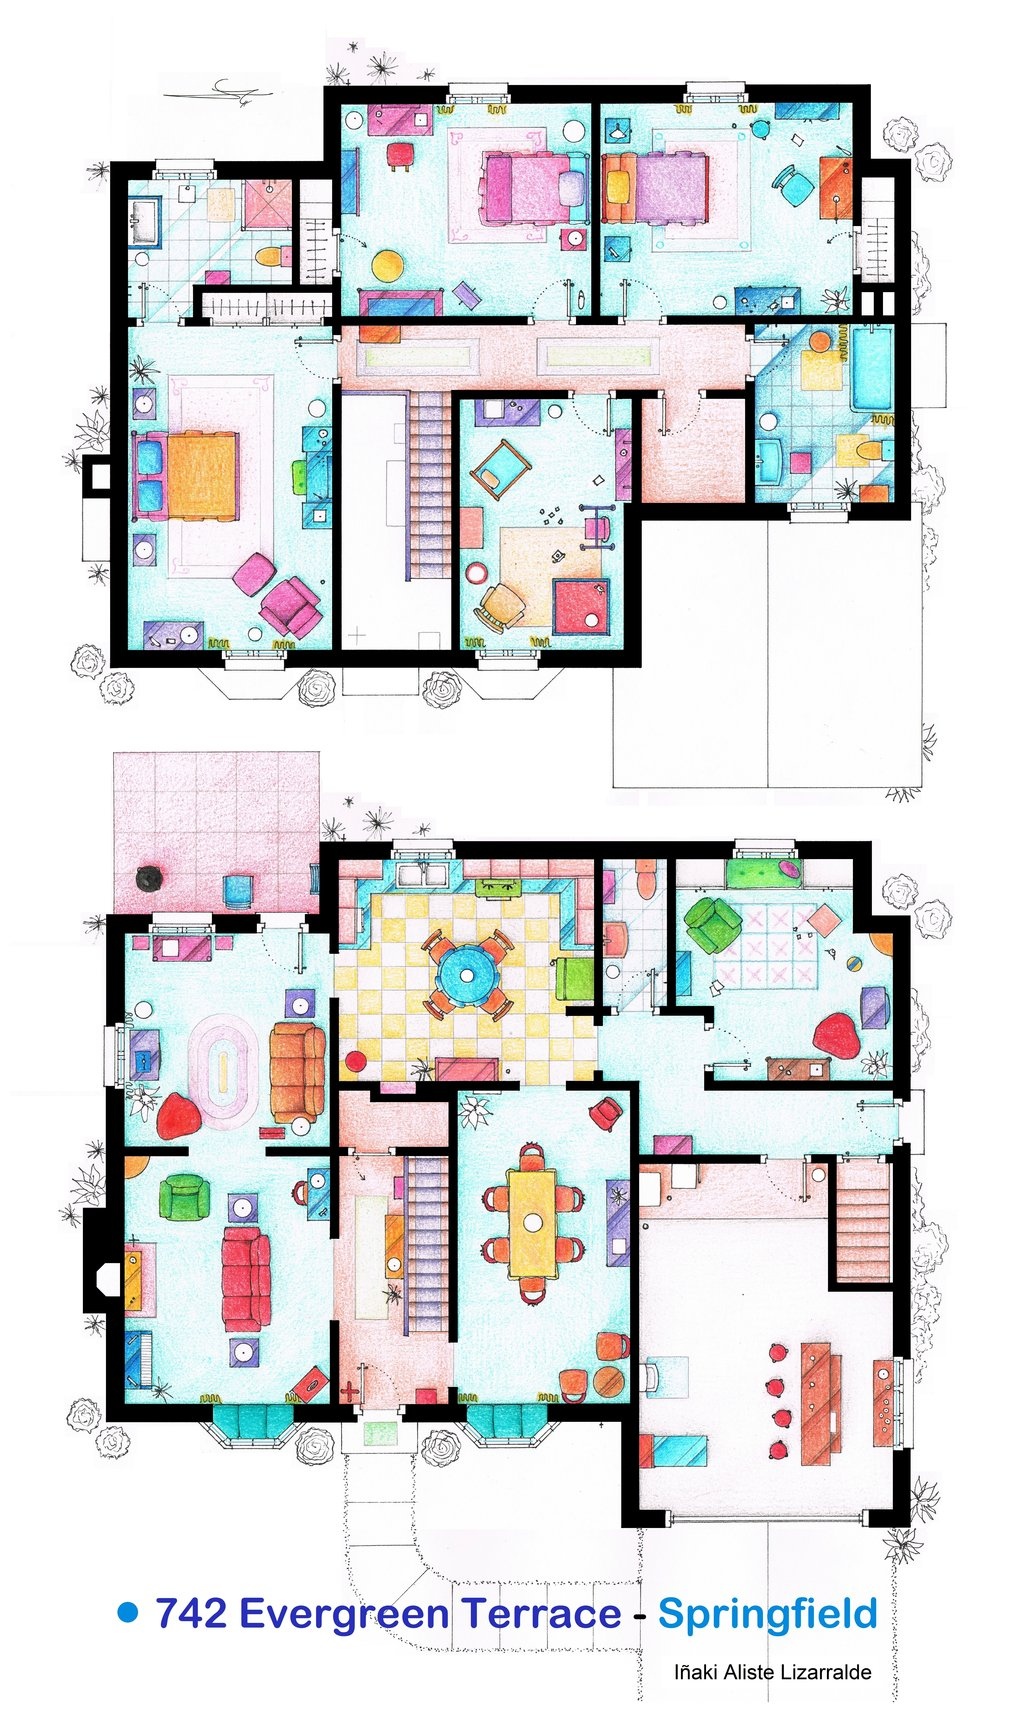 The website says about 9 Bedroom Apartment plan: an interesting entry